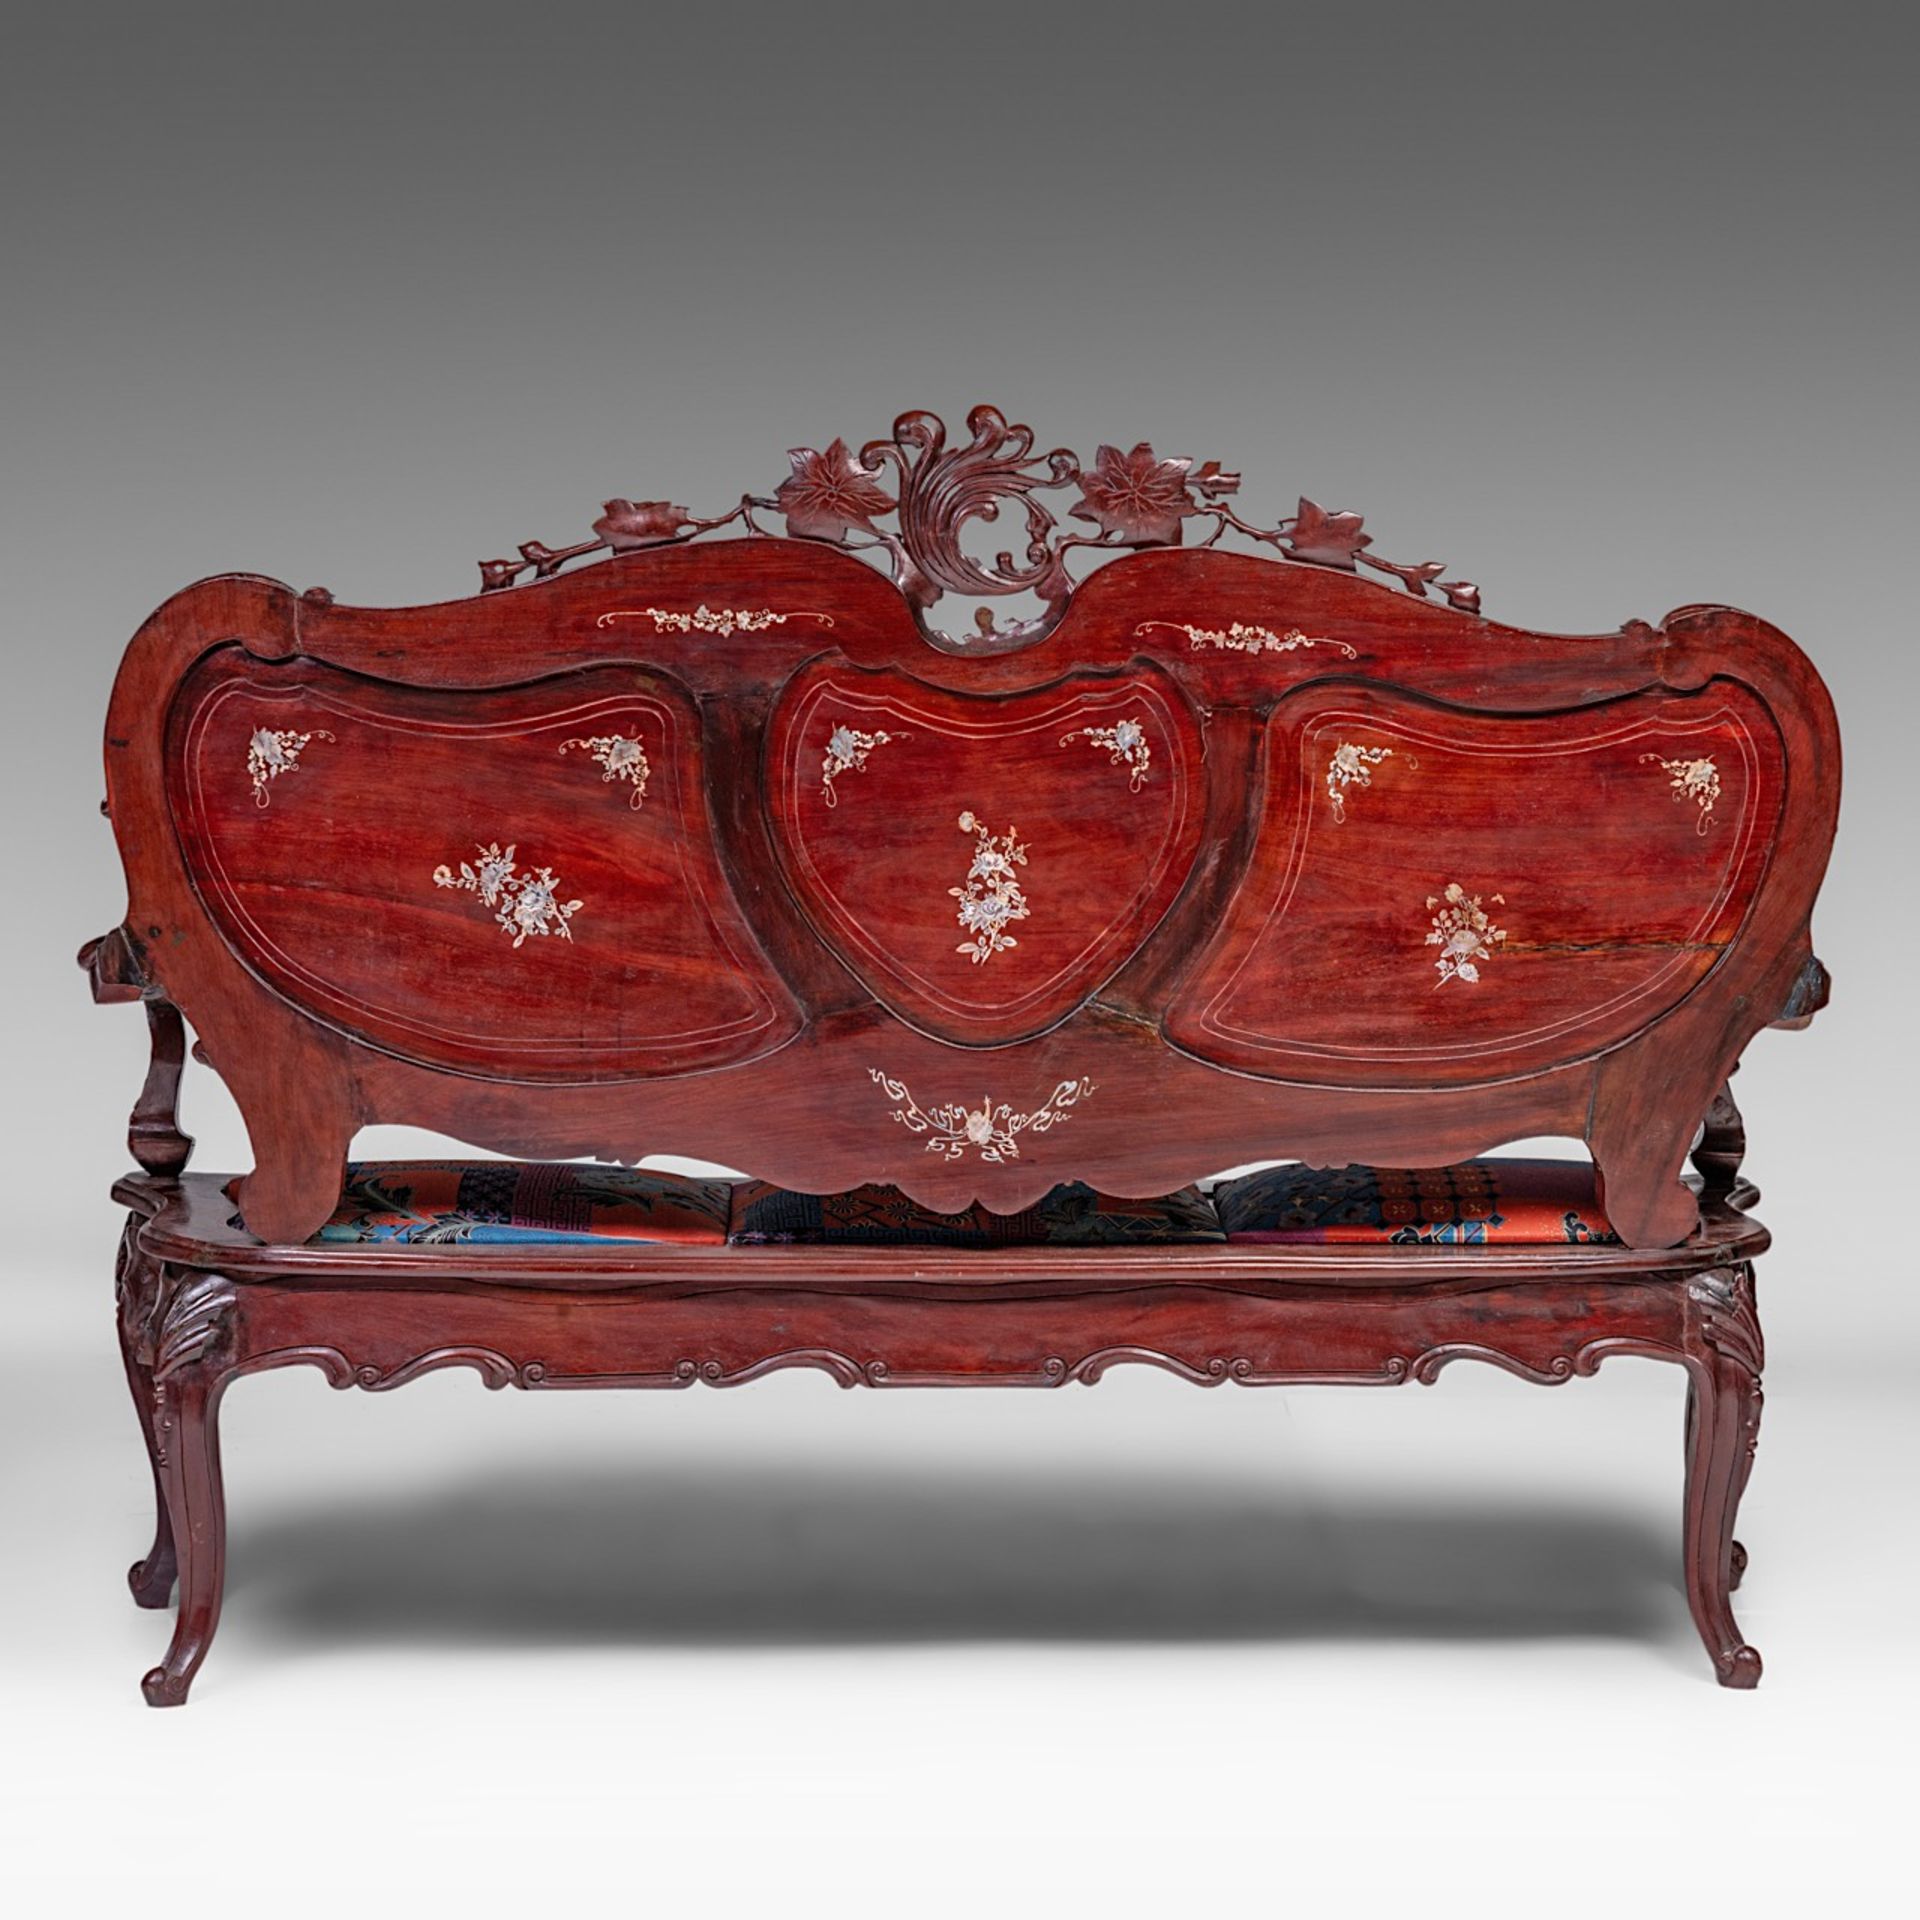 An Anglo-Chinese settee and two chairs, H settee 132 - H chair 108 cm - Image 4 of 24